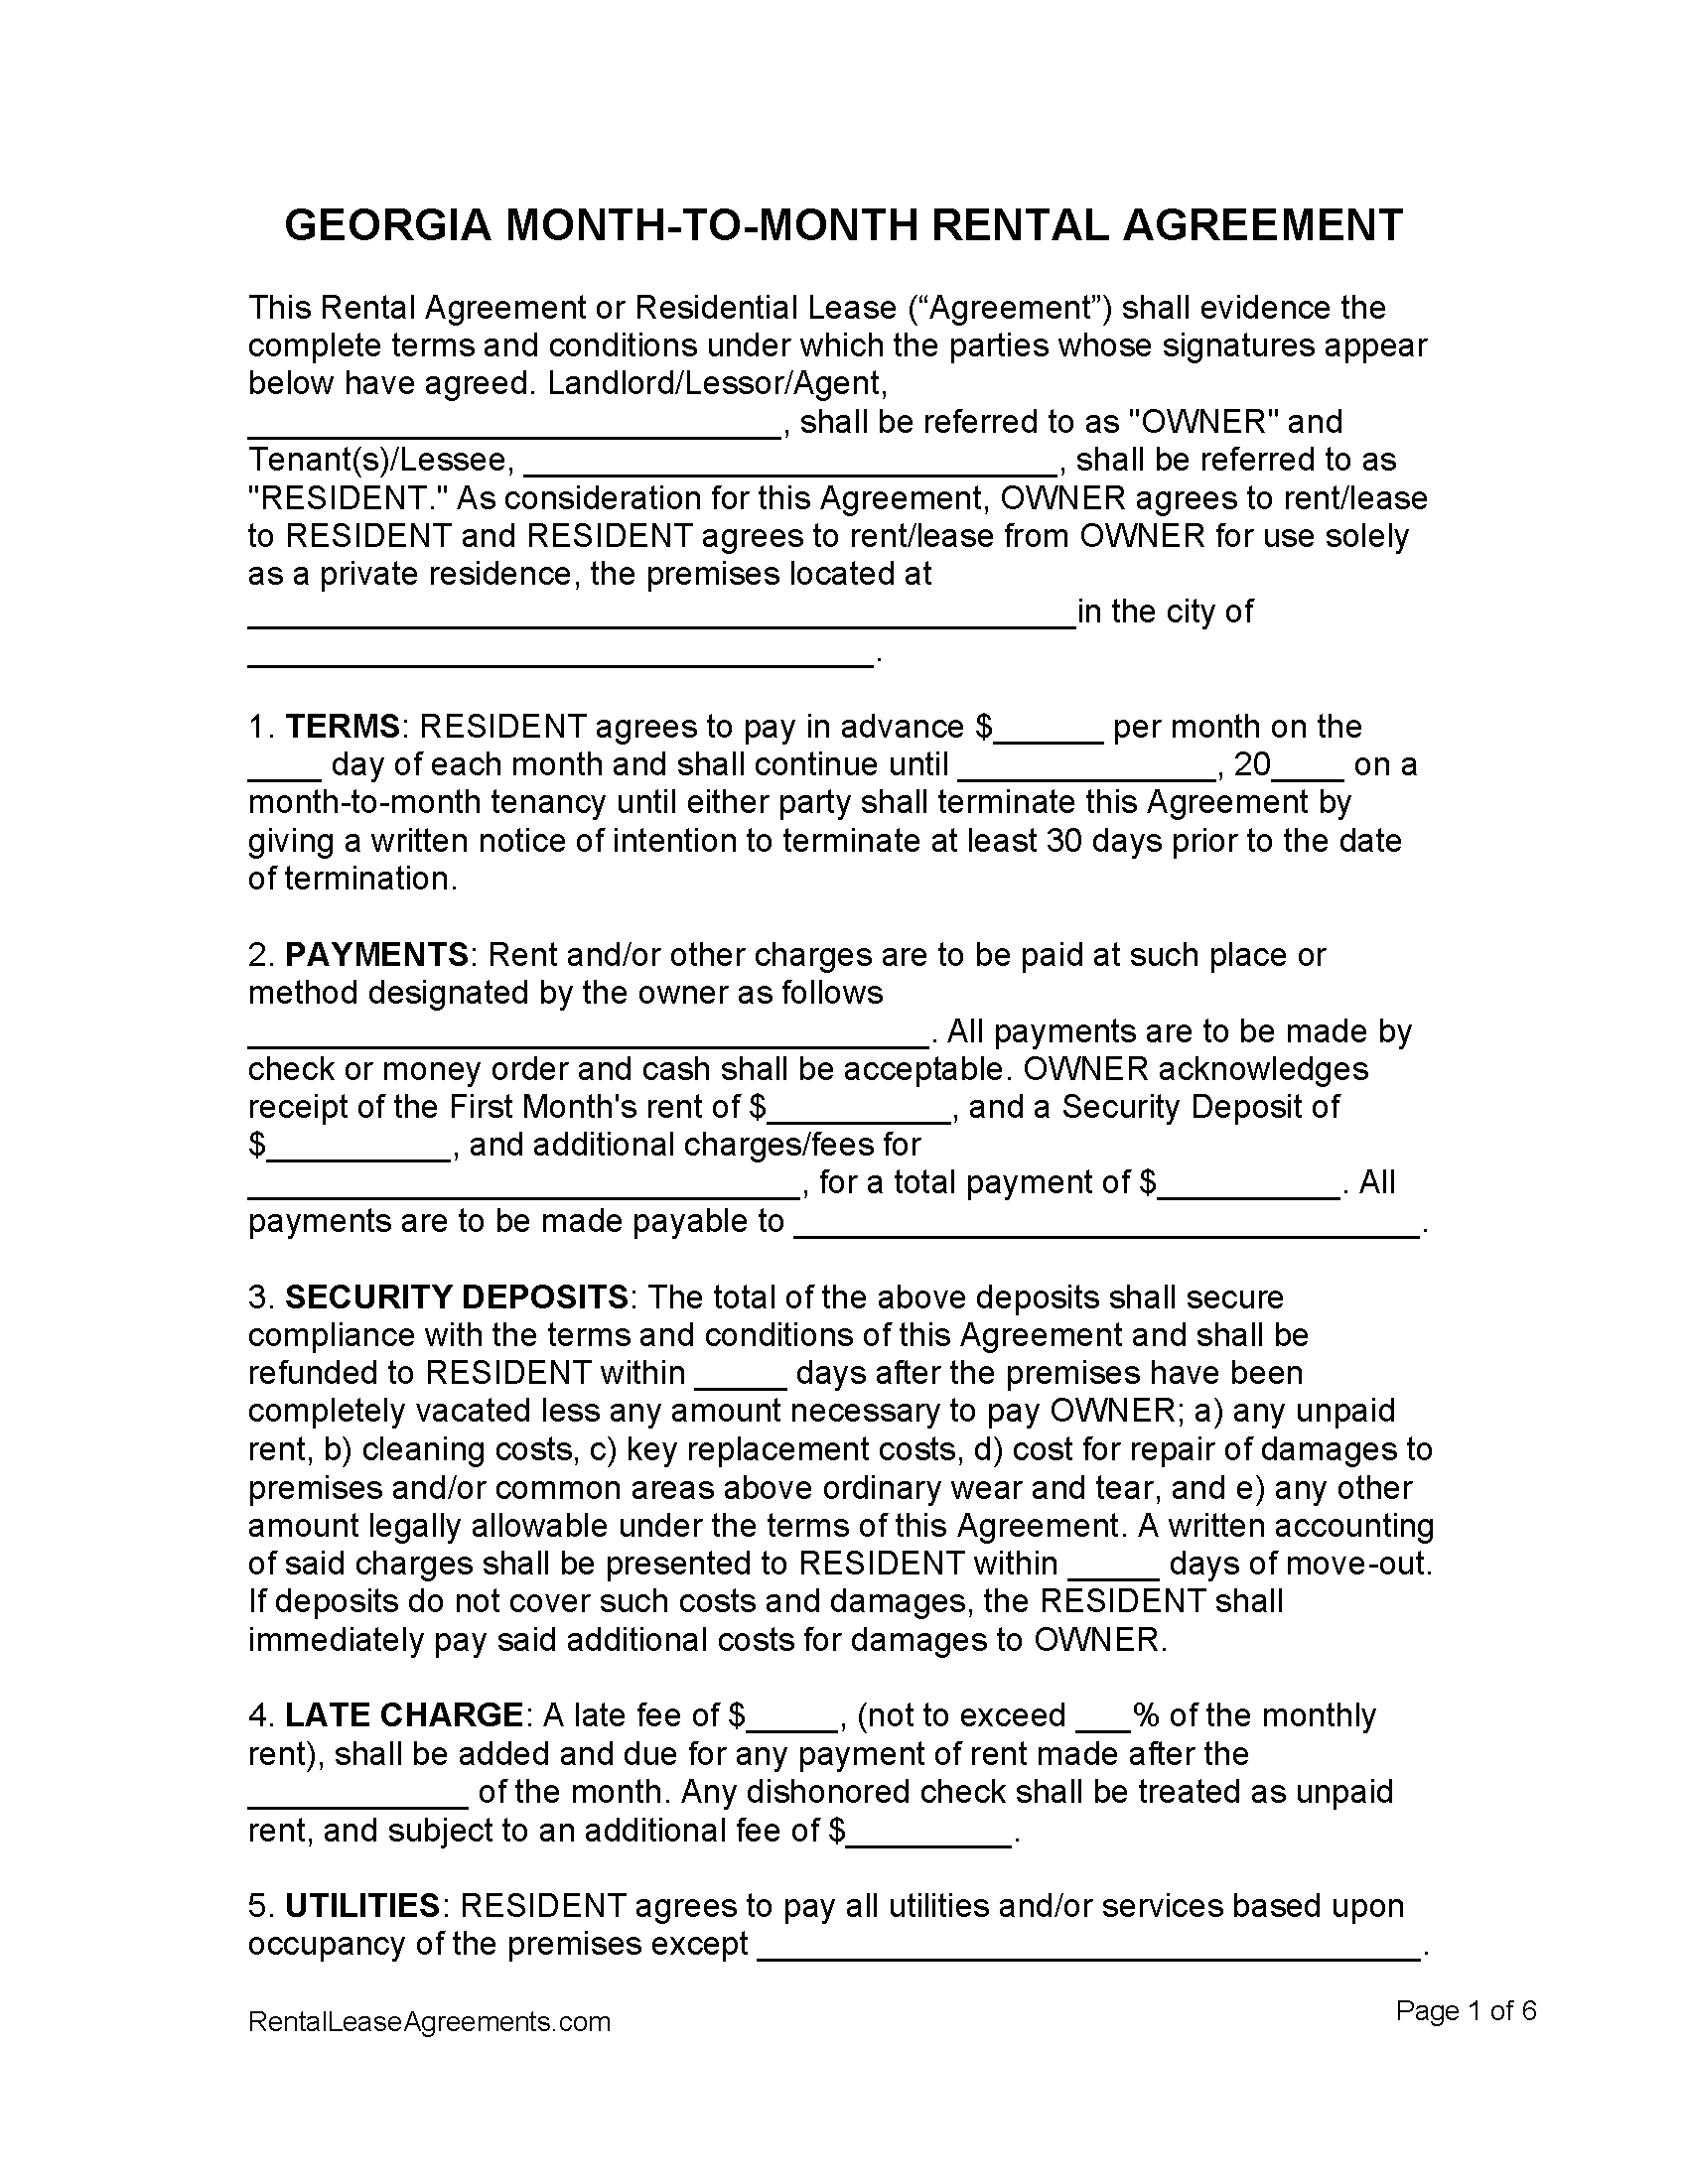 free-georgia-month-to-month-lease-agreement-pdf-ms-word